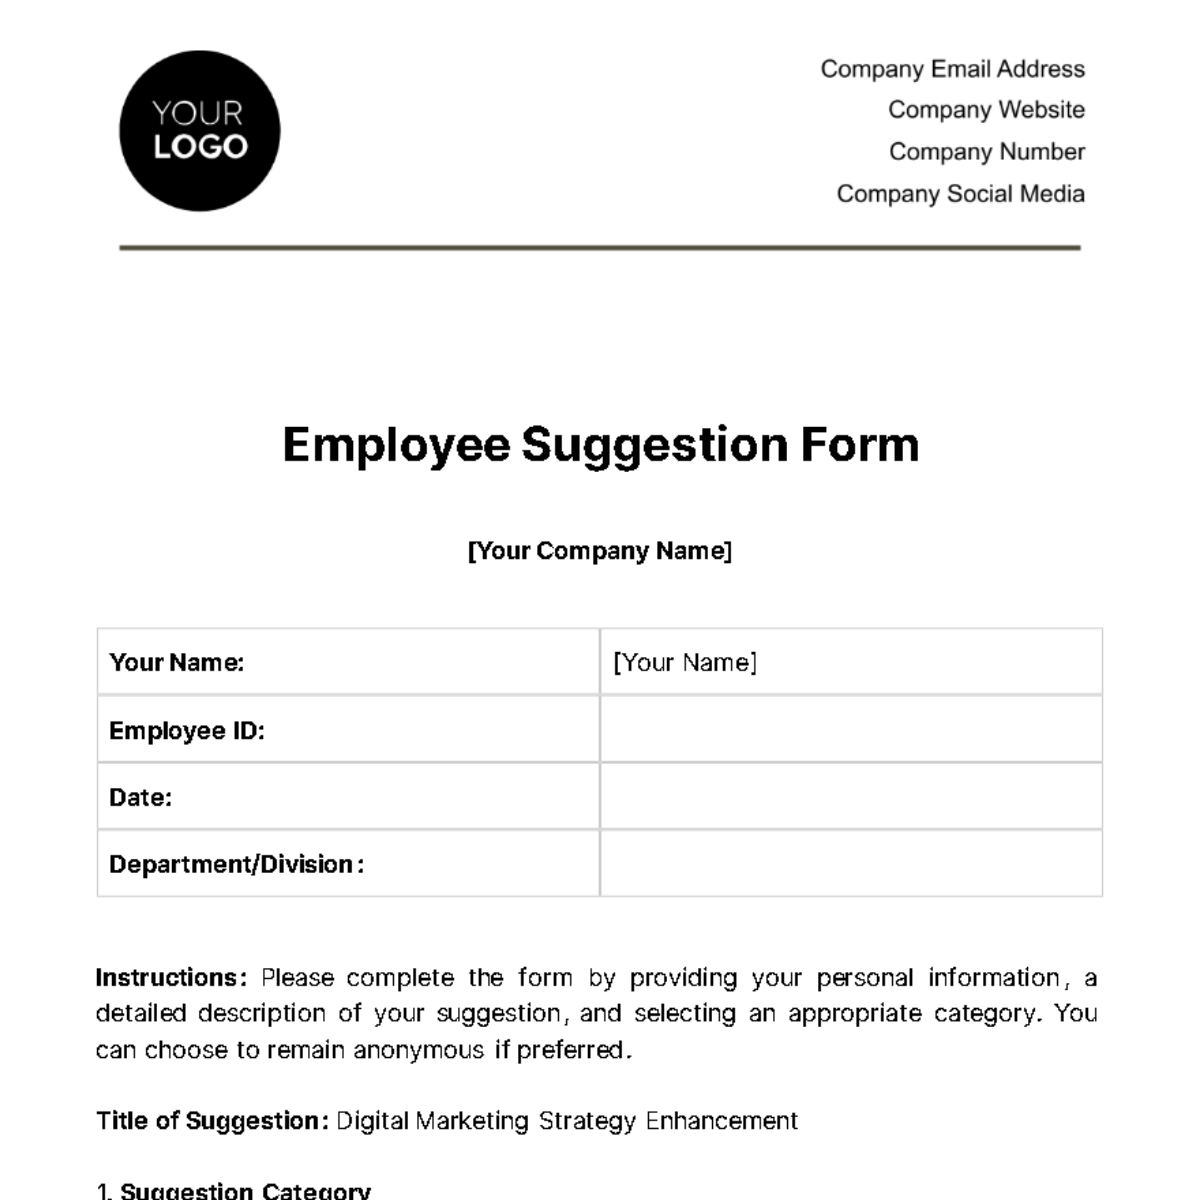 Employee Suggestion Form HR Template